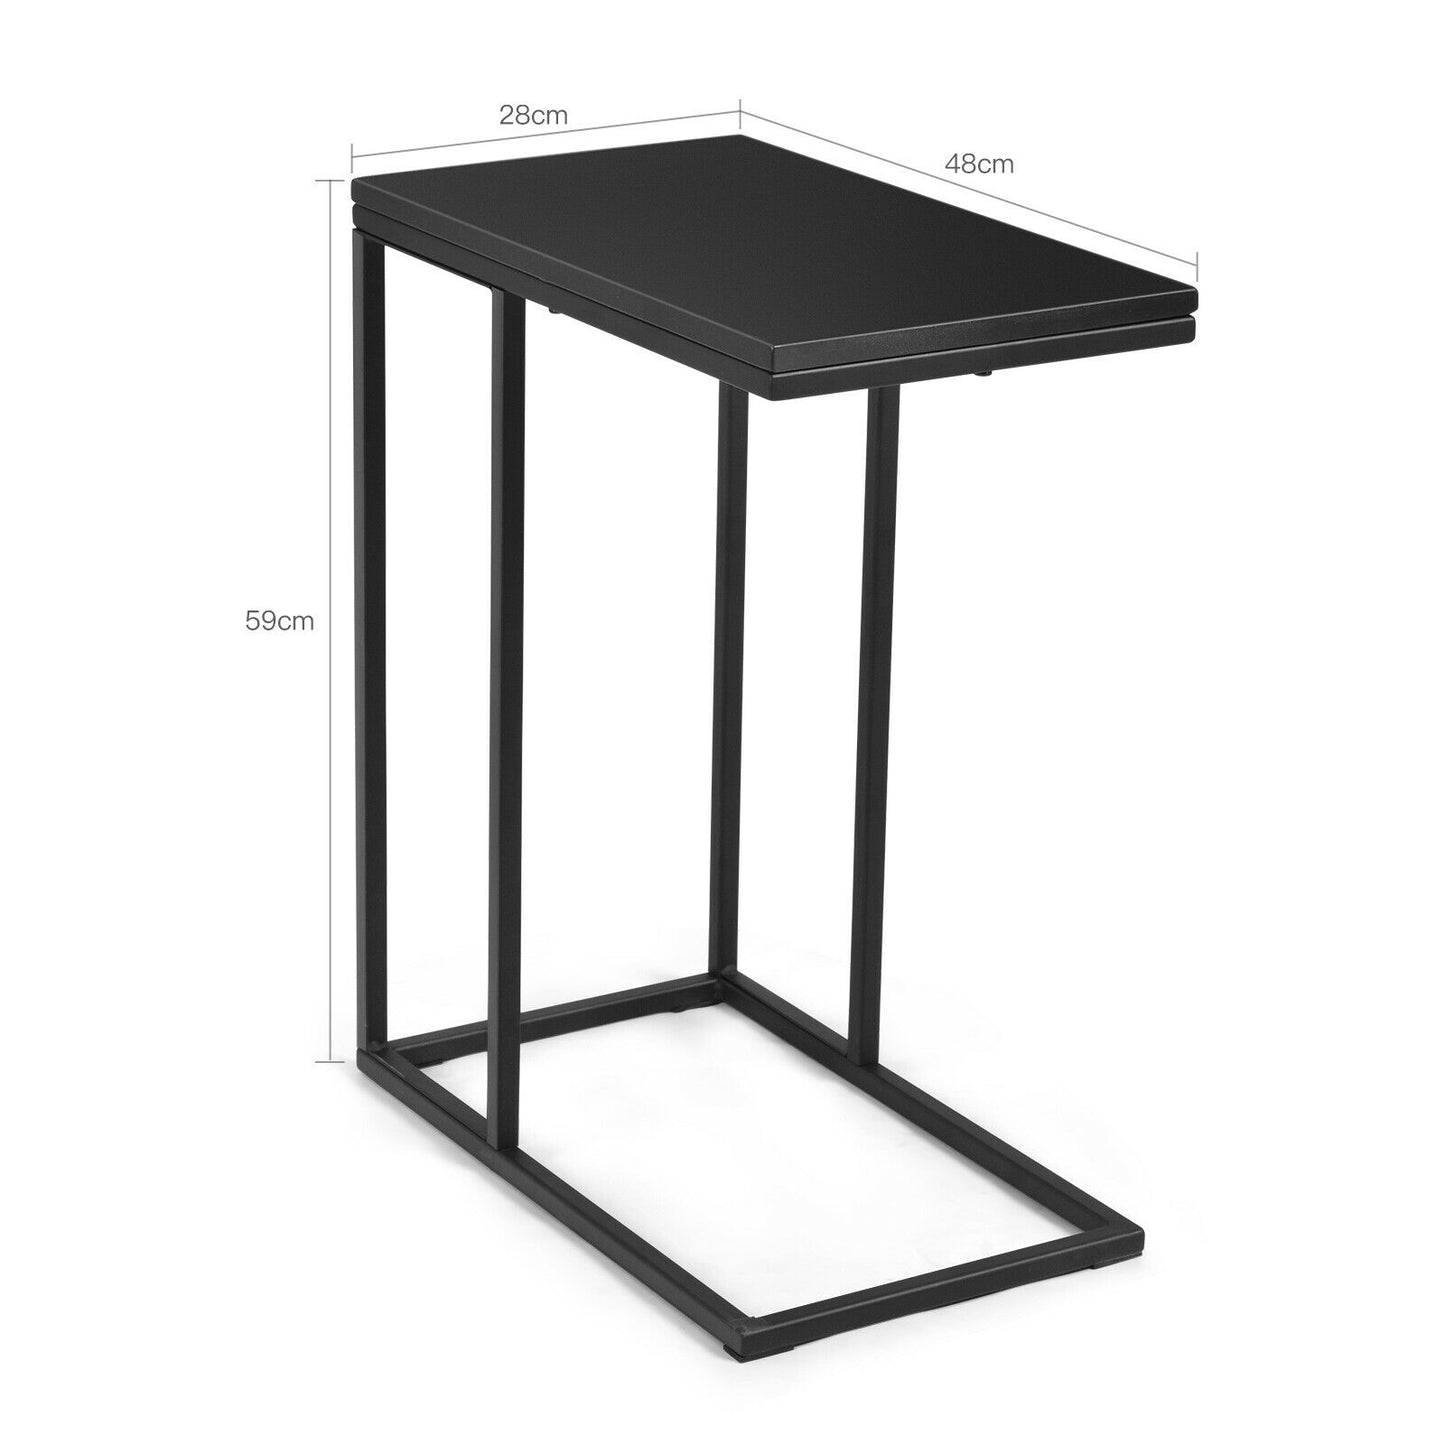 Bedside Table, Side Table, End Table, Industrial Sofa Side Table with C-Shaped Style for Living Room, Black, Costway, 4